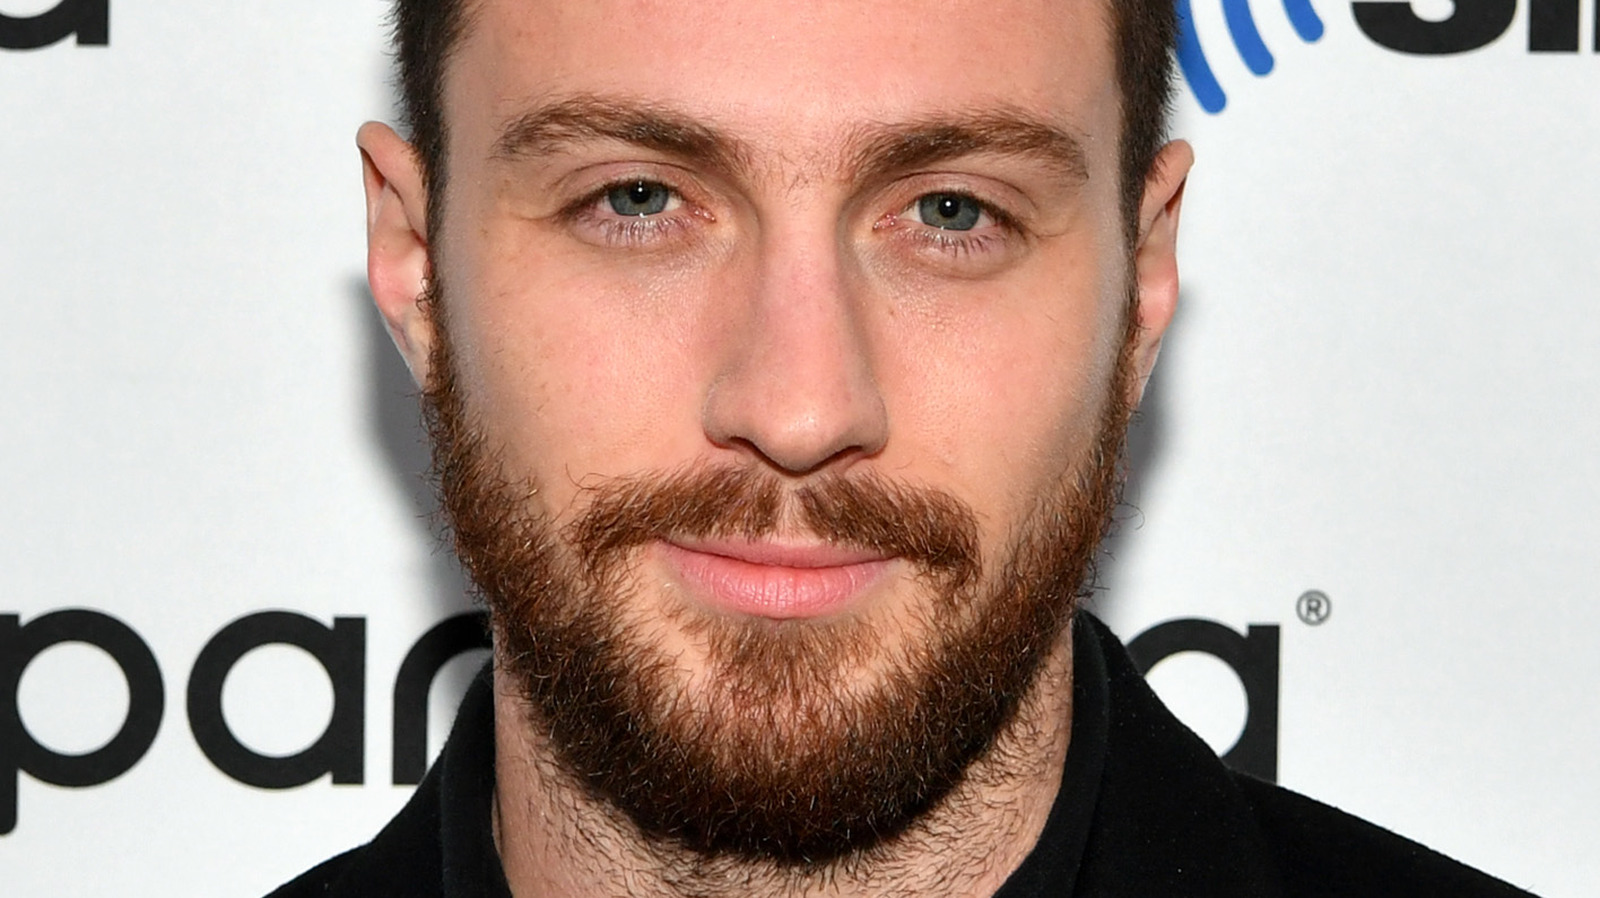 How Old Was Aaron Taylor-Johnson When He Met His Wife?